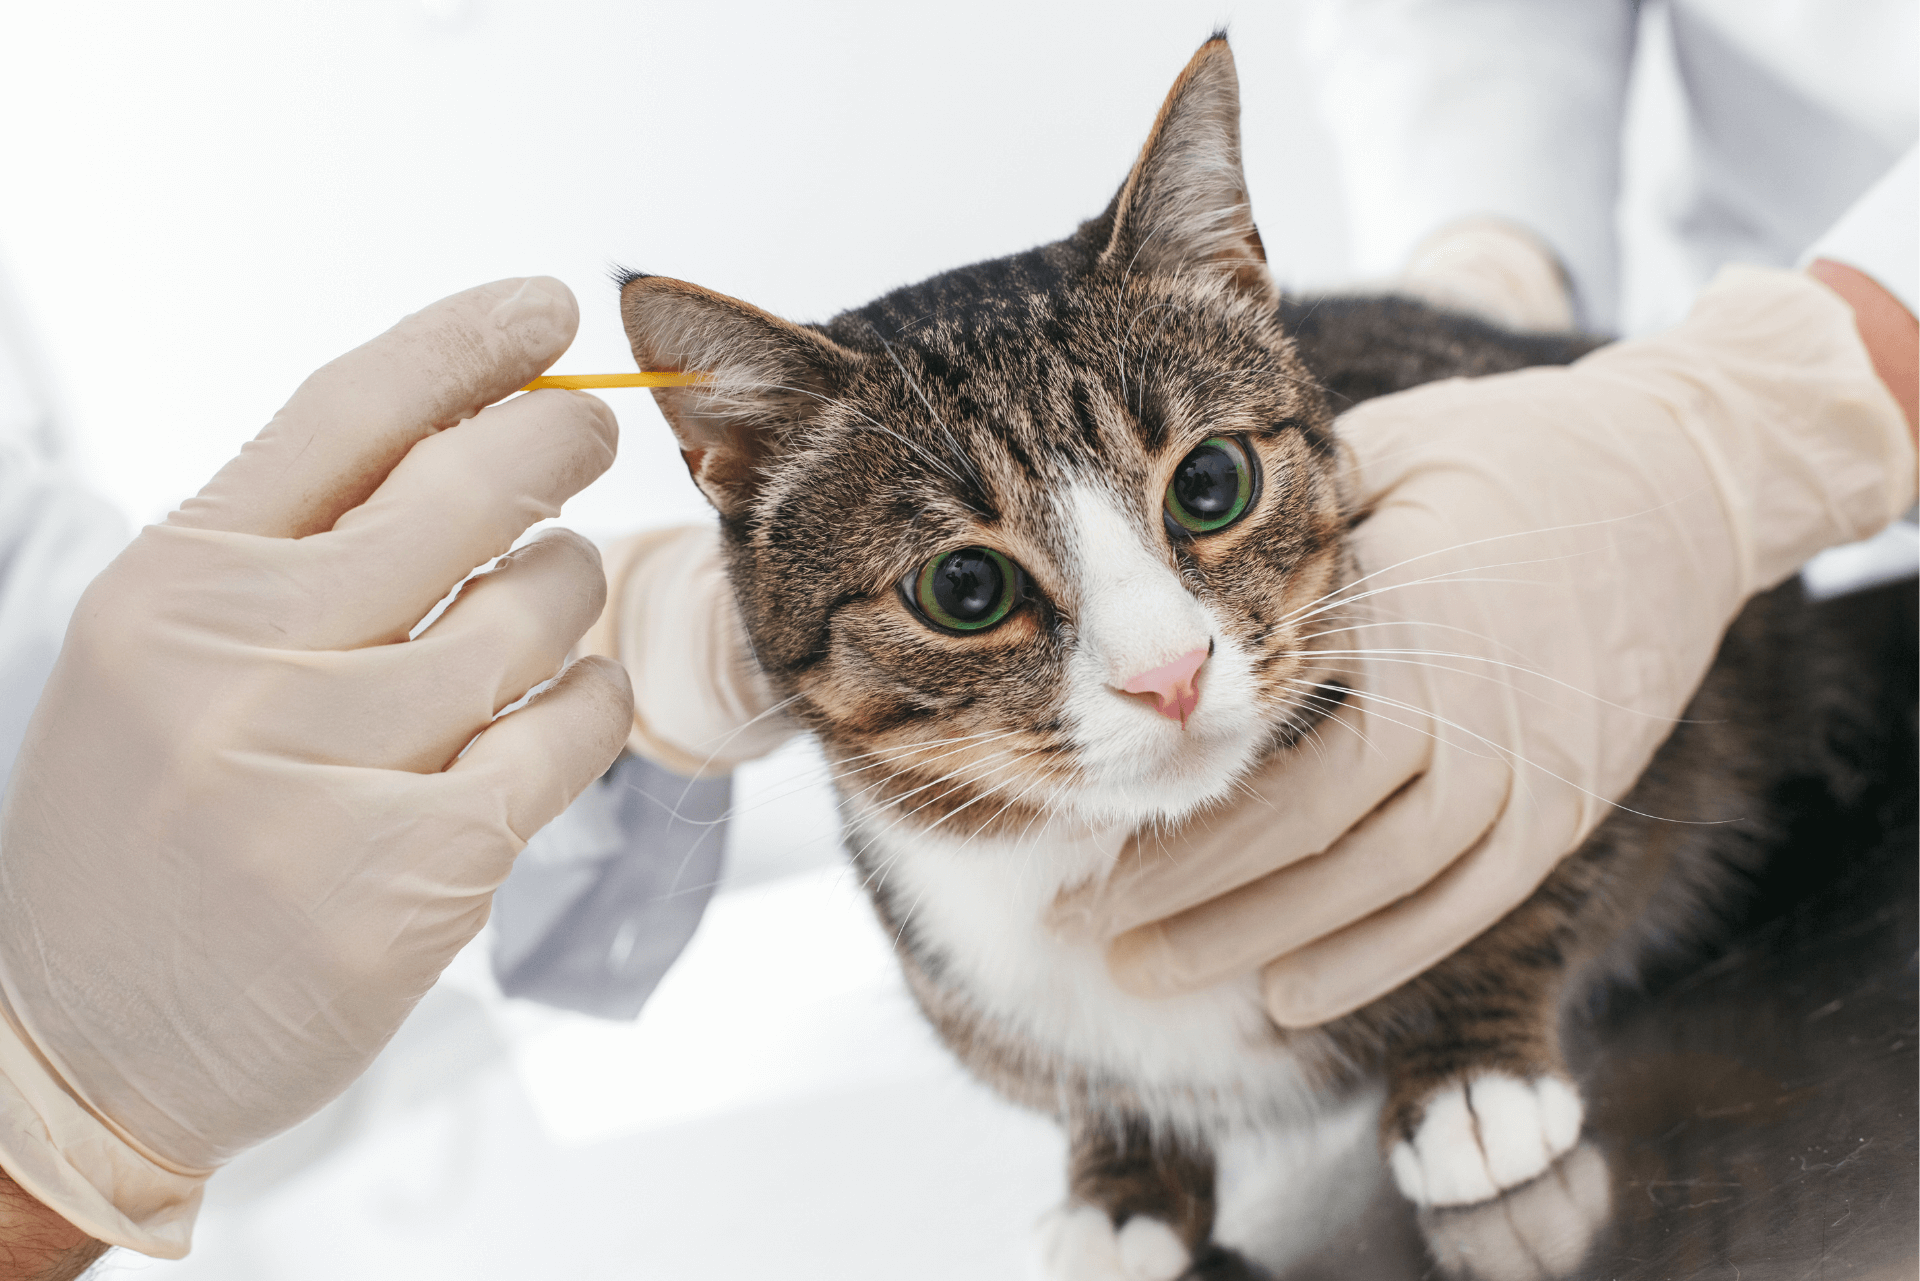 How To Get Rid of Ear Mites In Cats? 3 Things